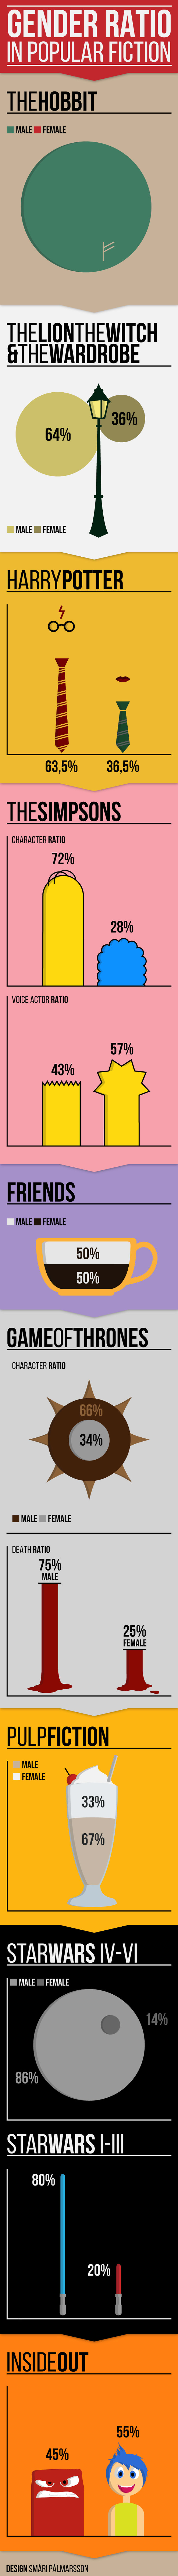 I Made An Infographic On Gender Ratio In Popular Fiction